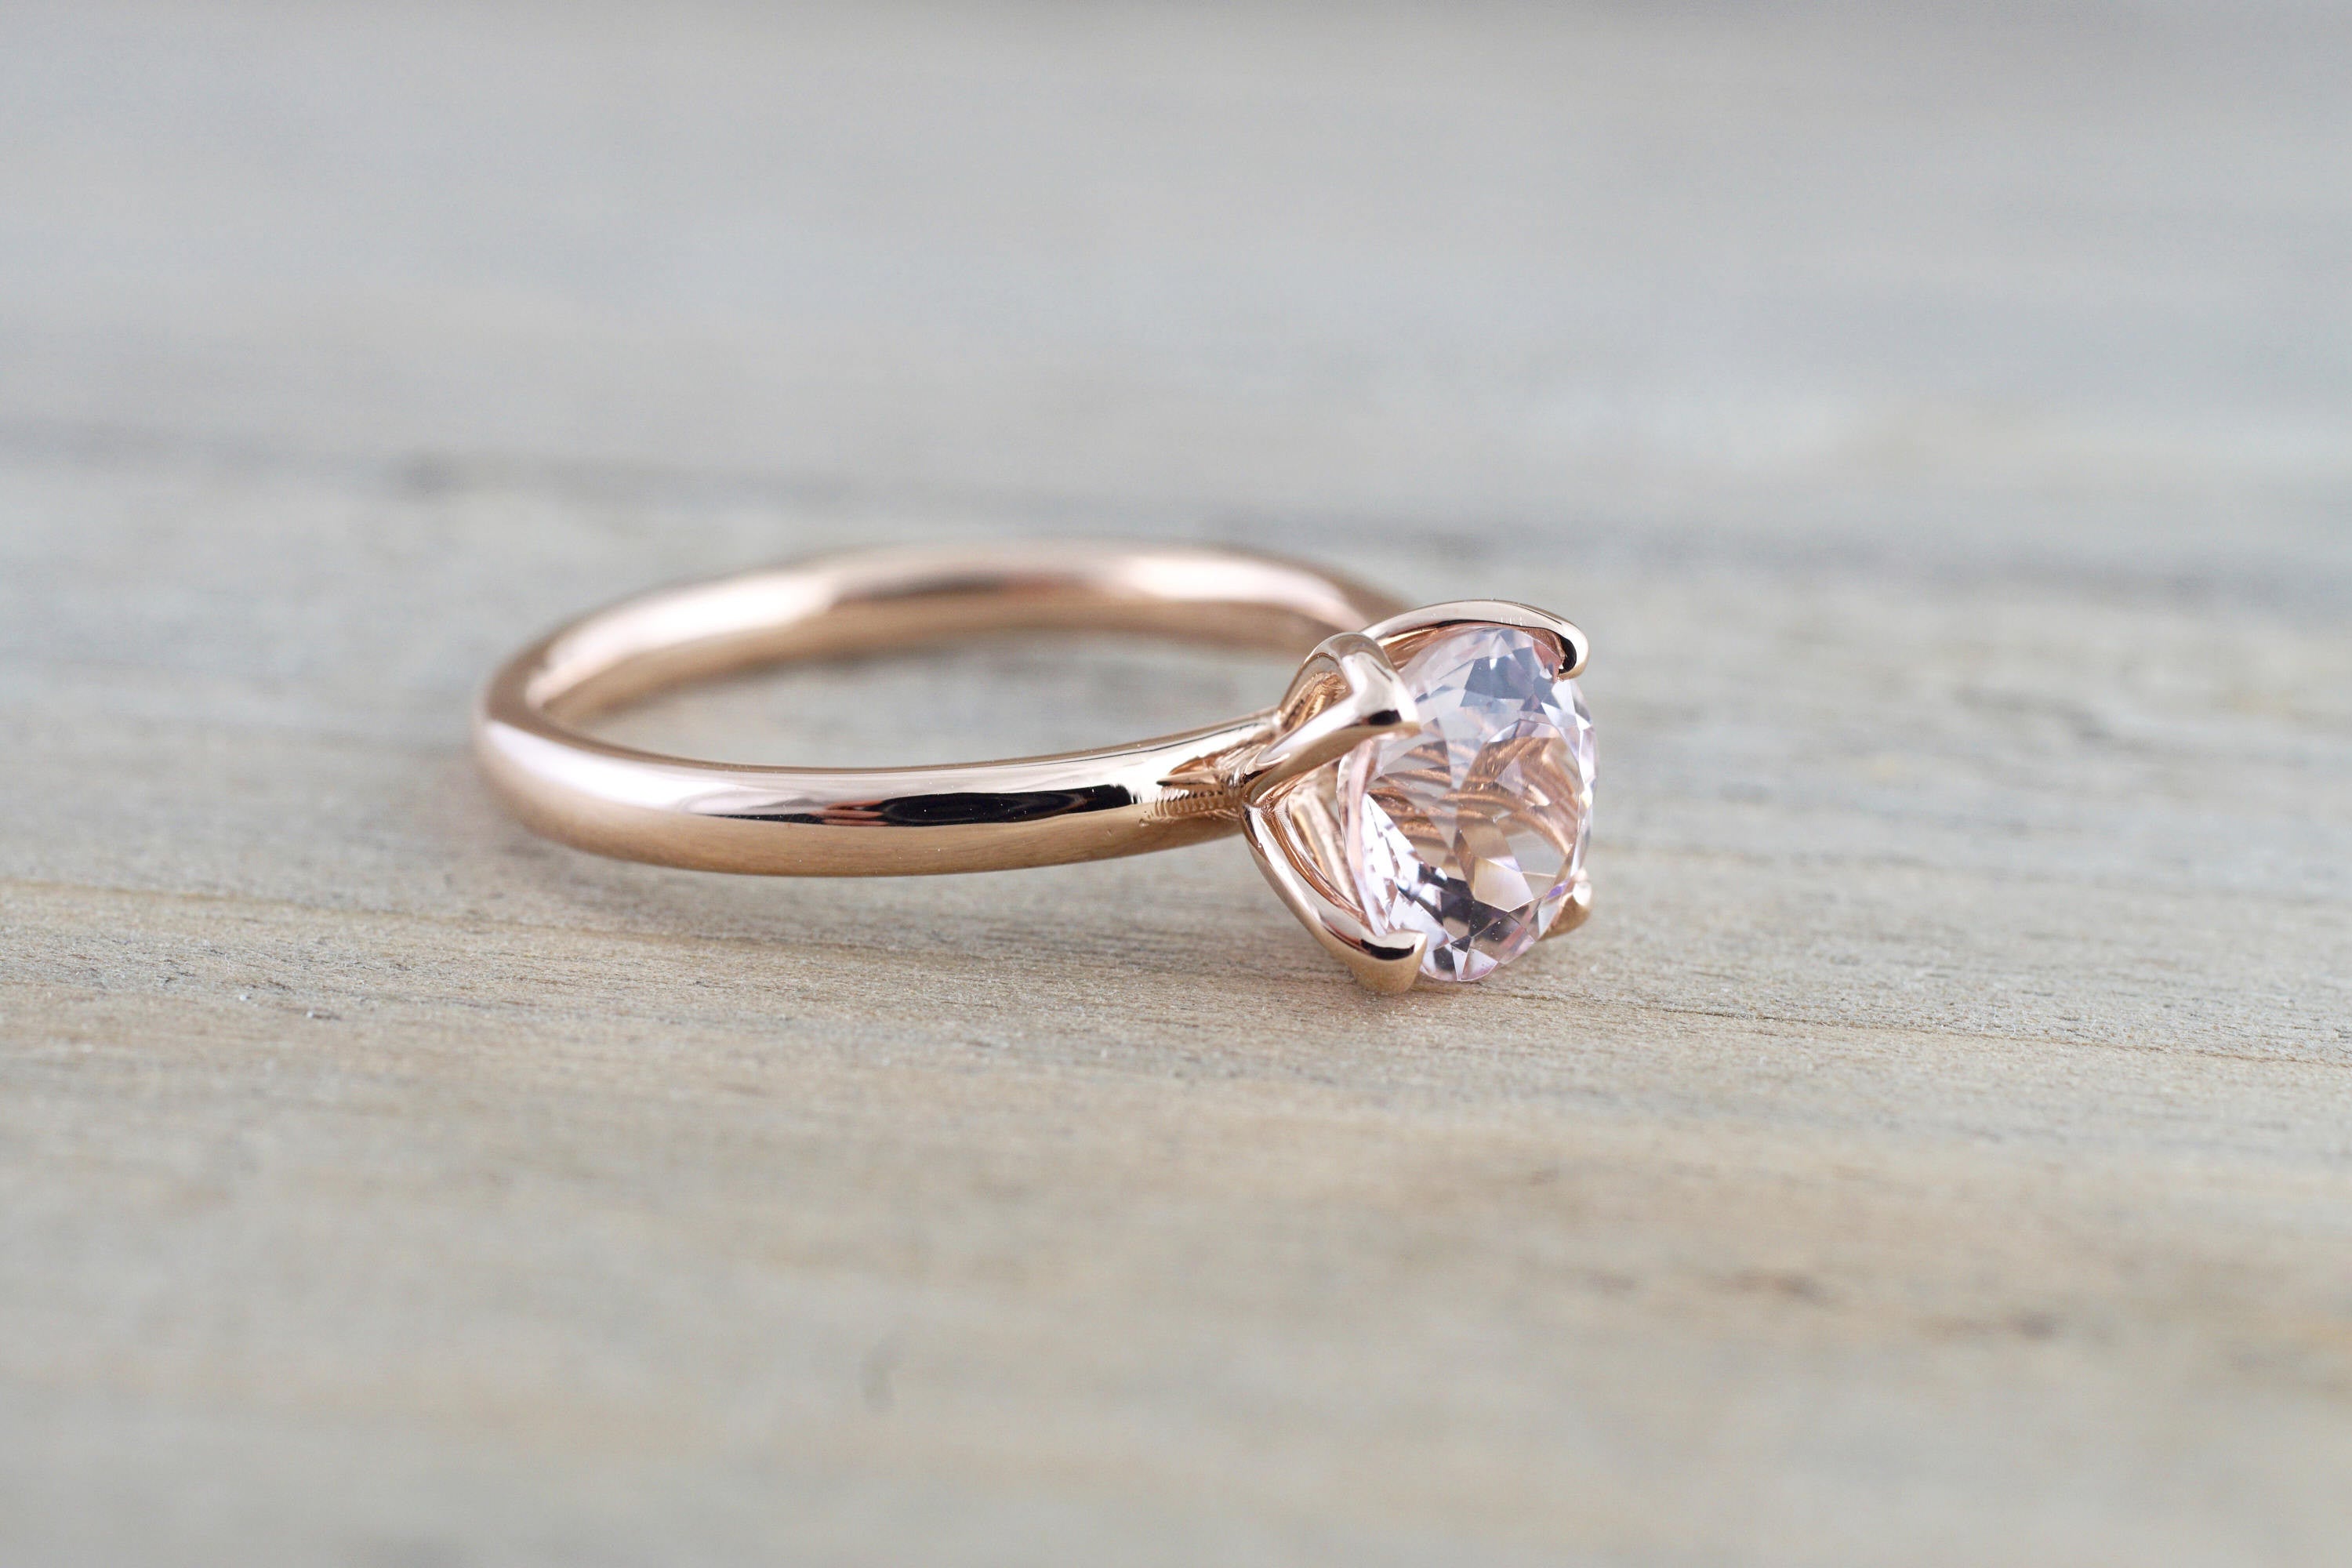 14k Rose Gold Round Morganite Pink Classic flower petal Solitaire Engagement Ring - Brilliant Facets